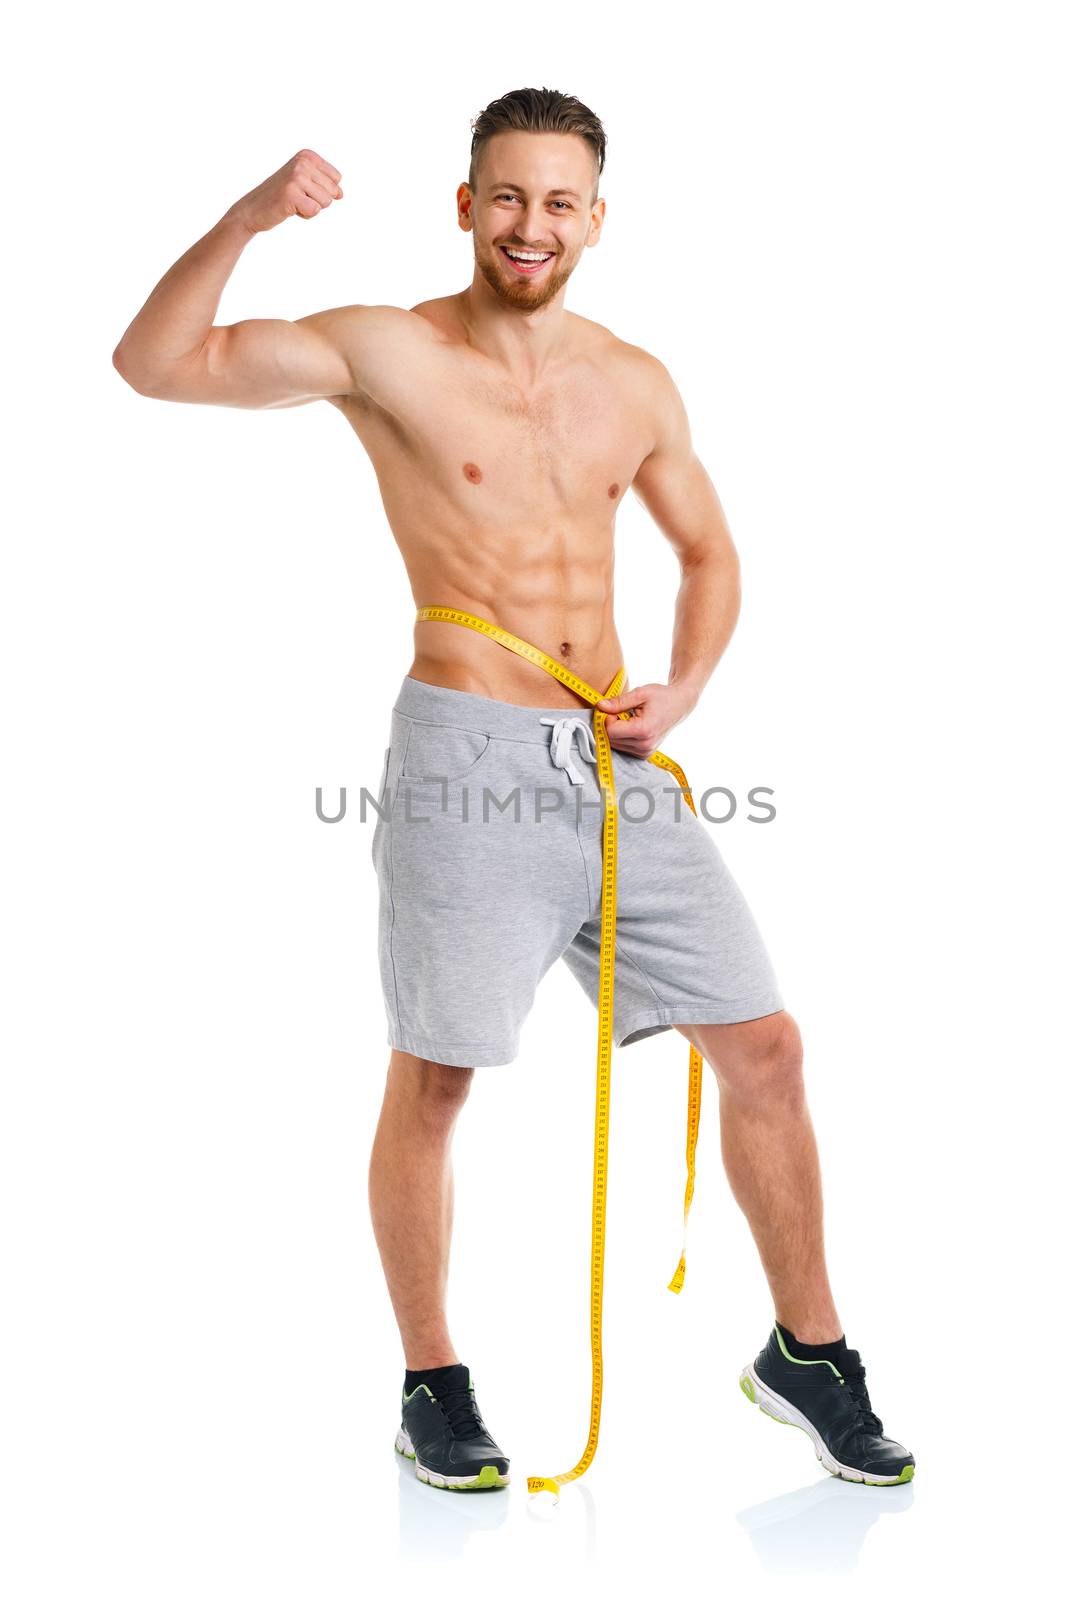 Athletic man with measuring tape on the white background